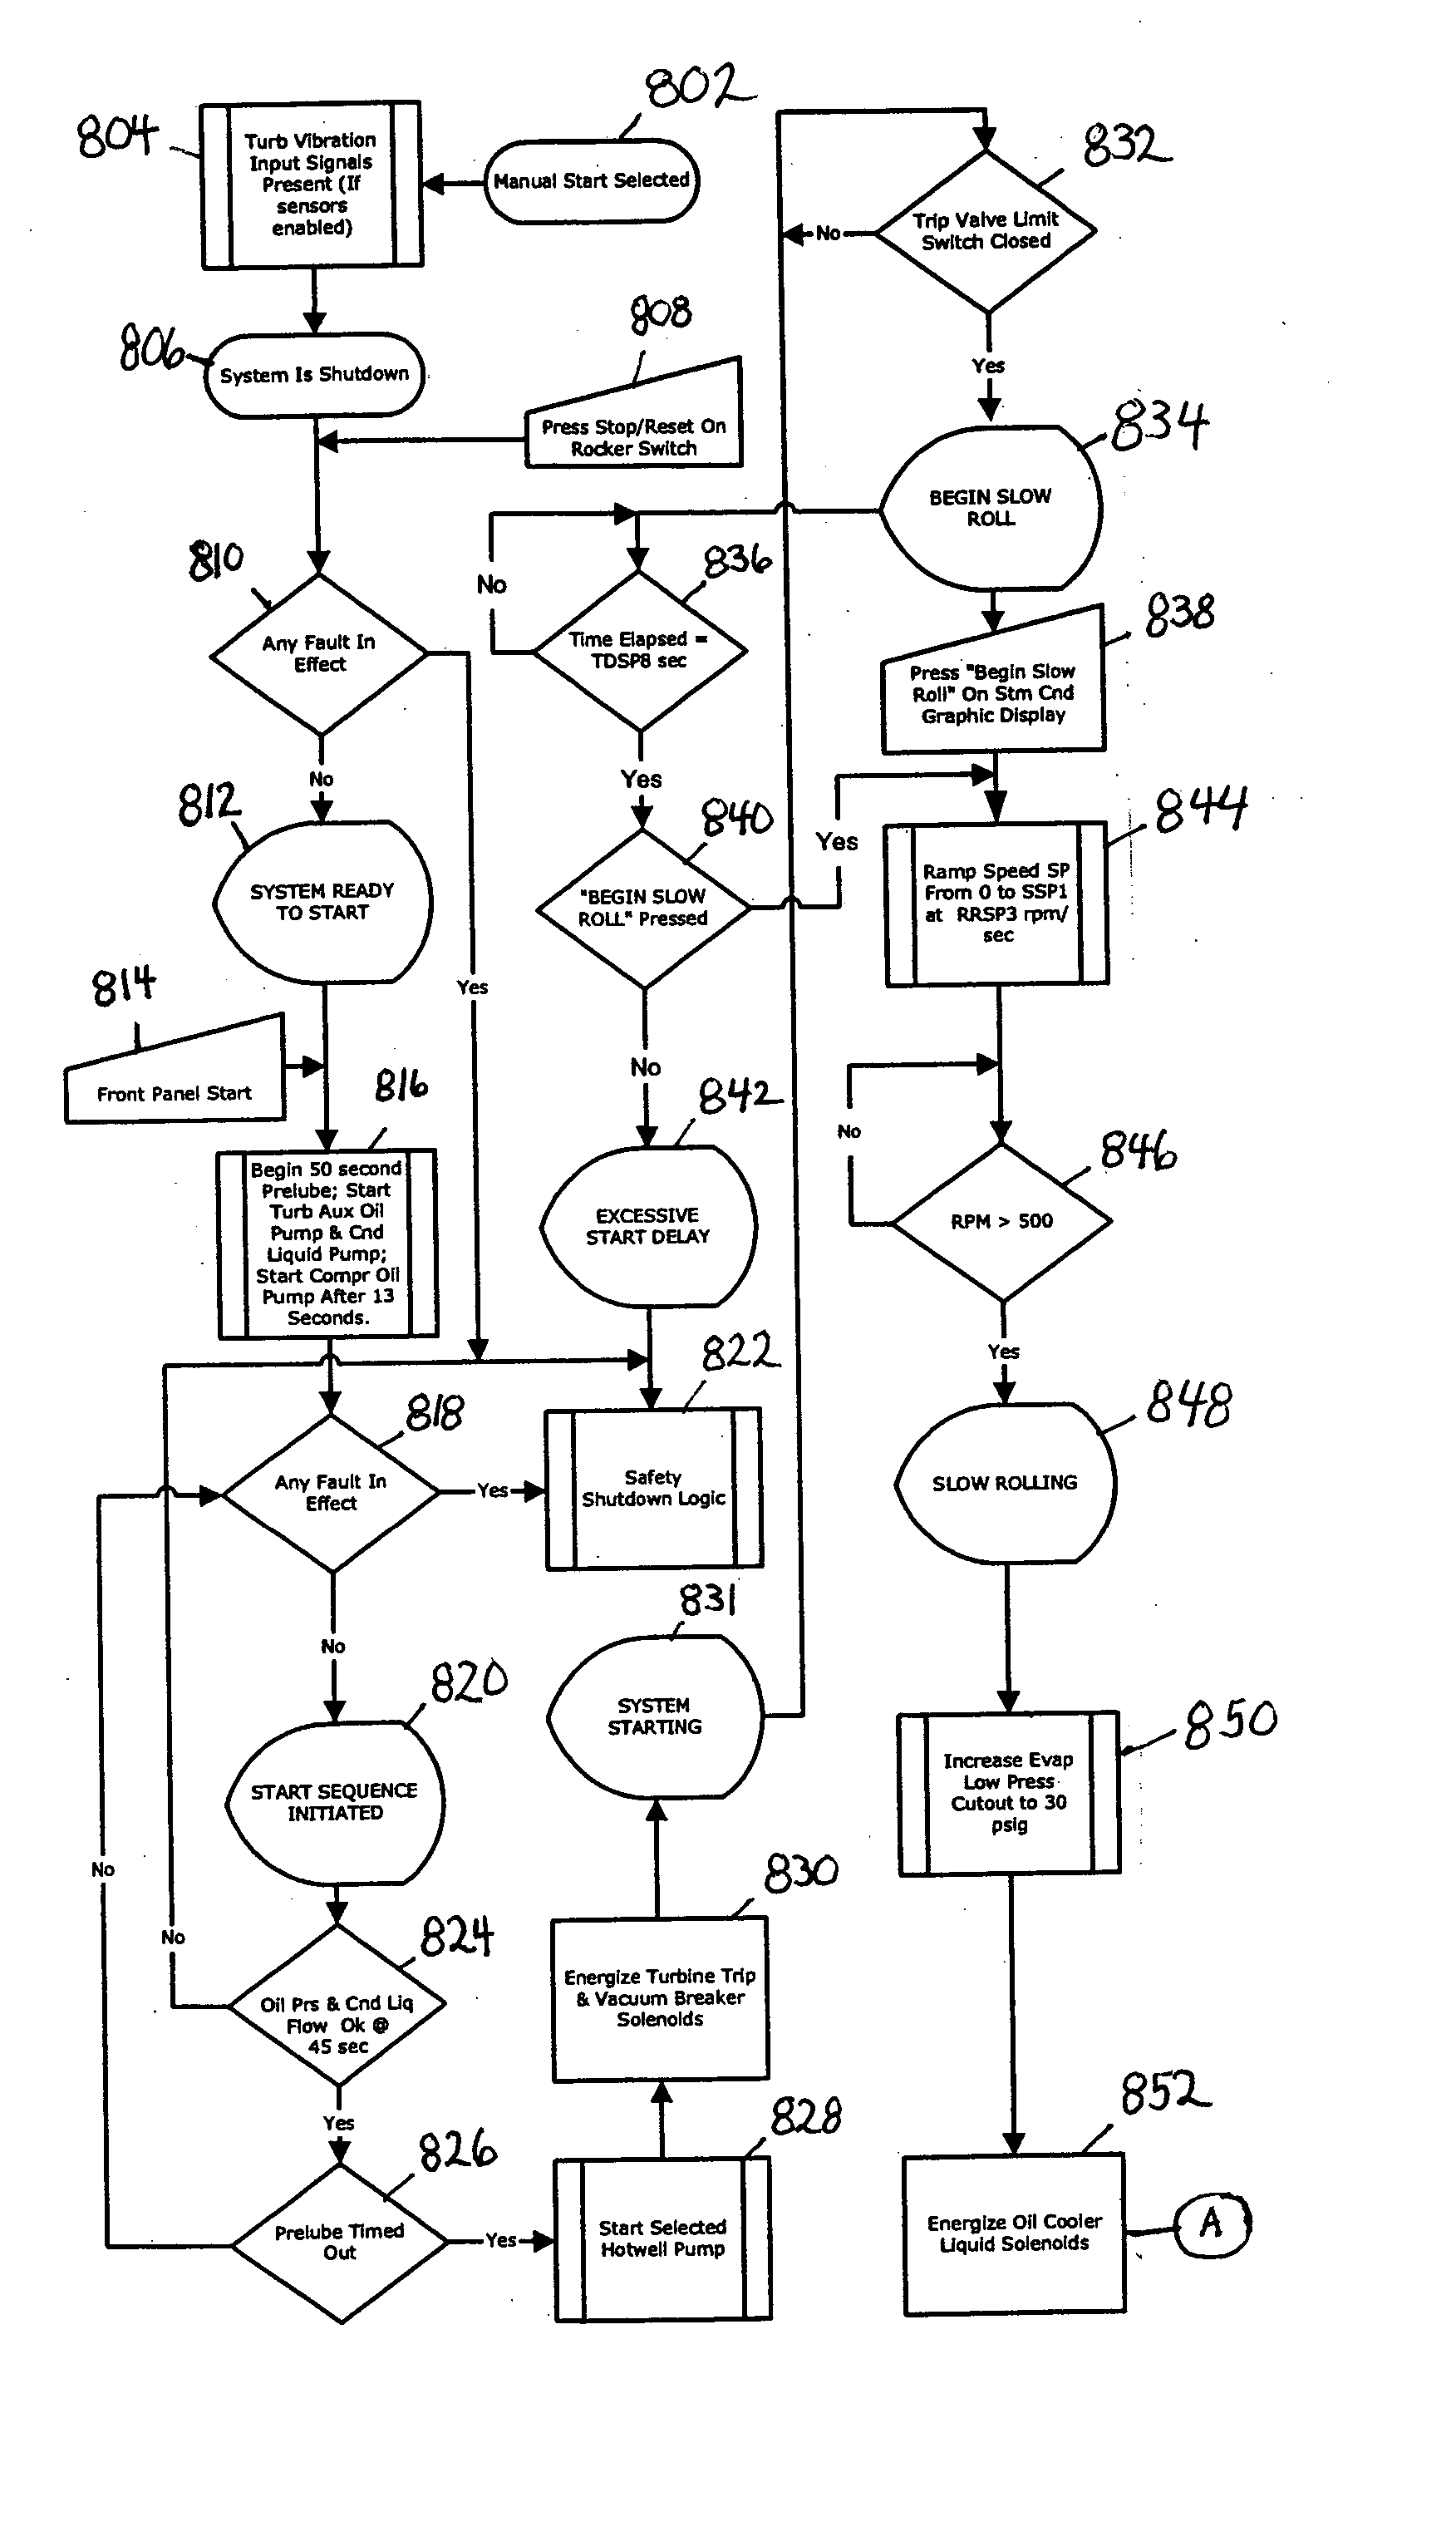 Enhanced manual start/stop sequencing controls for a steam turbine powered chiller unit